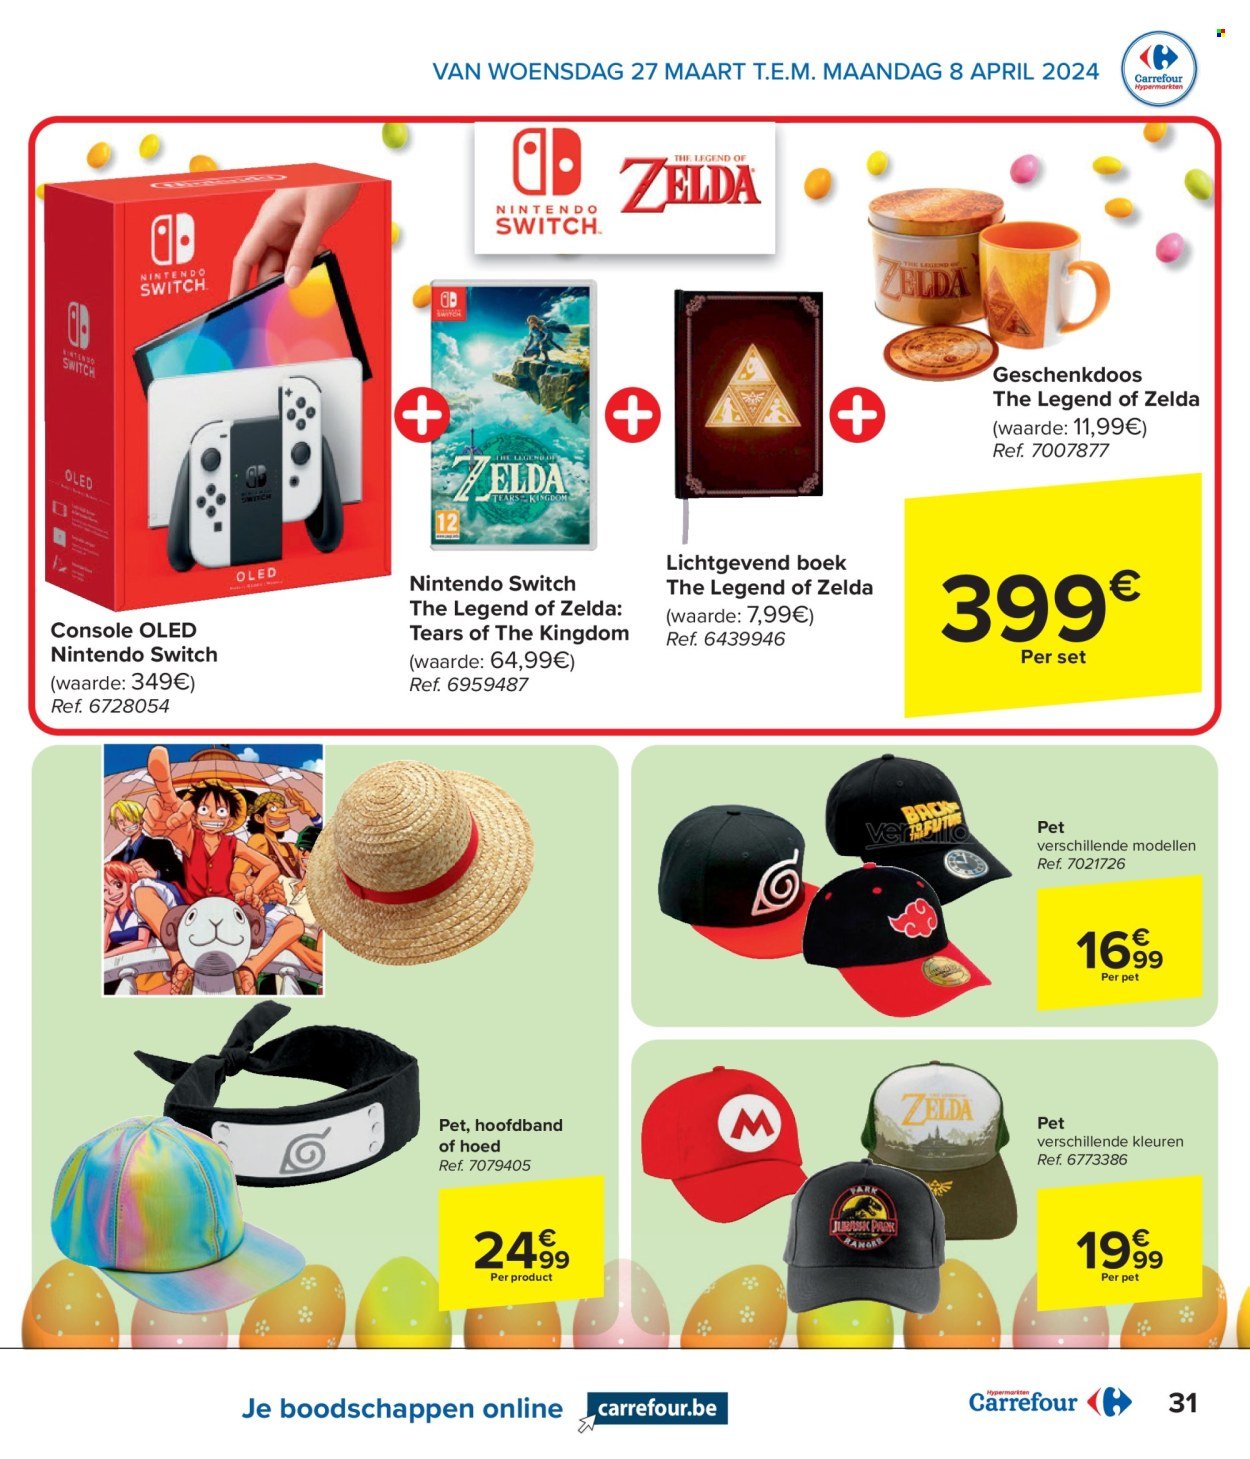 Catalogue Carrefour hypermarkt - 27.3.2024 - 8.4.2024. Page 31.